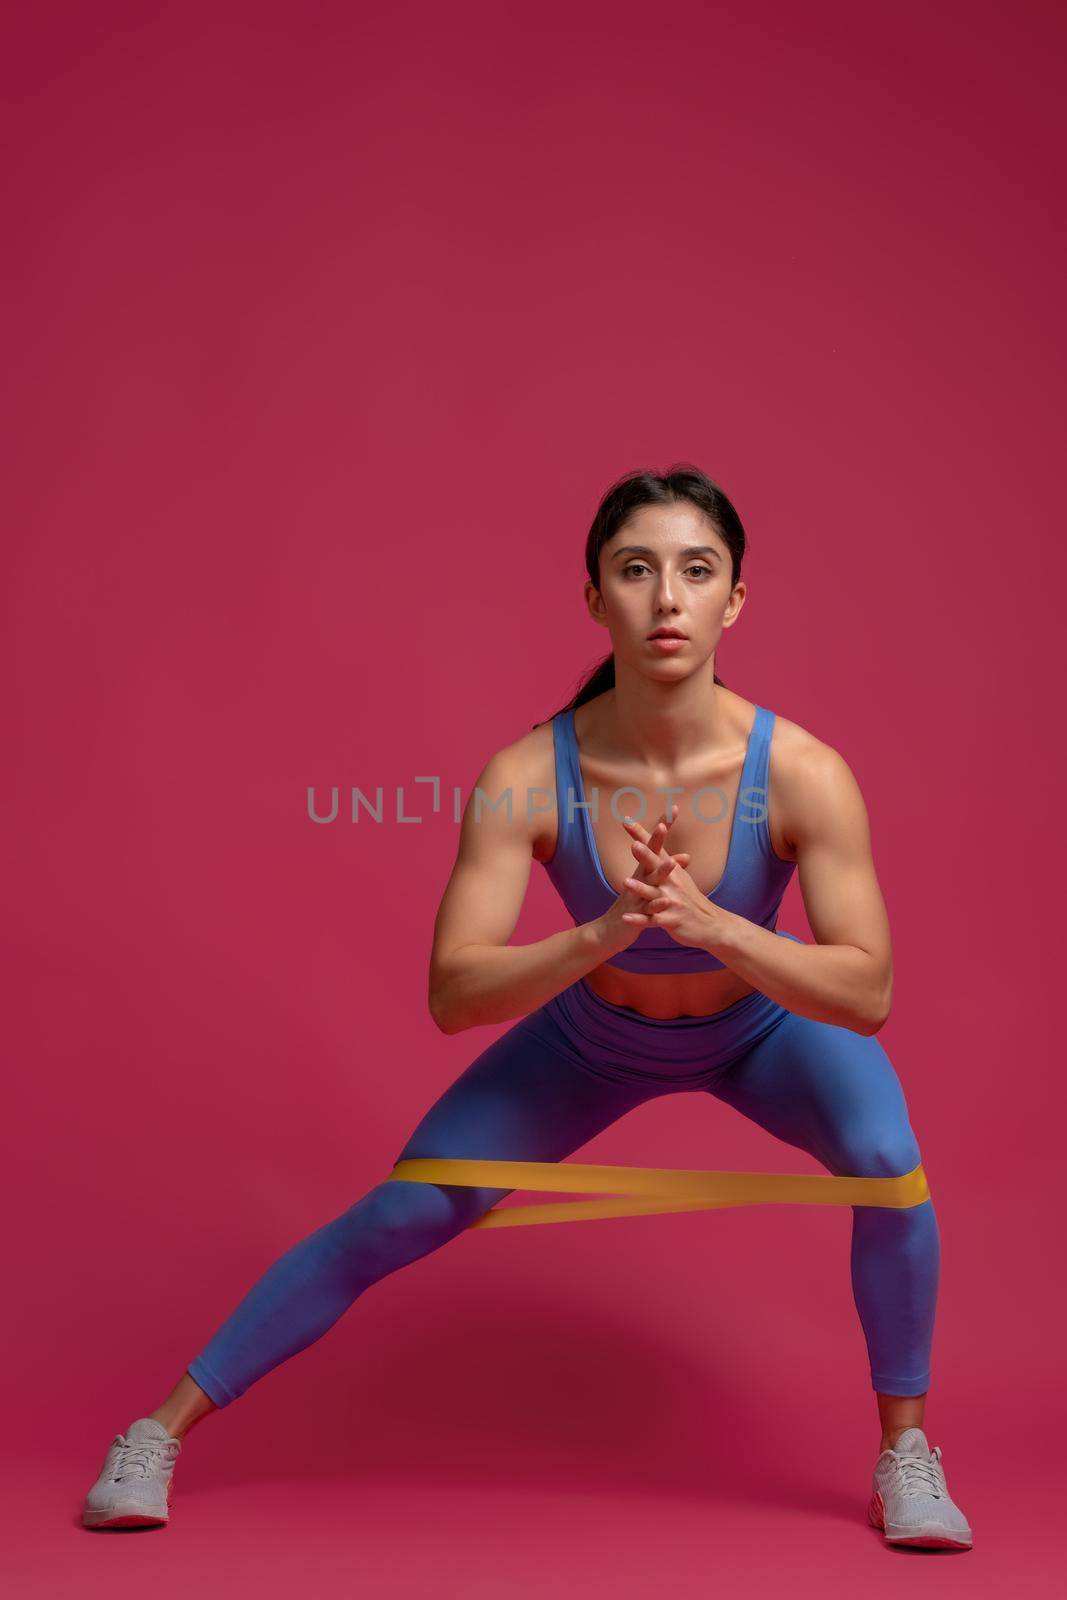 Attractive athletic girl dressed in blue sports top and leggings doing side lunges with resistance elastic band on maroon background. Concept of weight training for woman